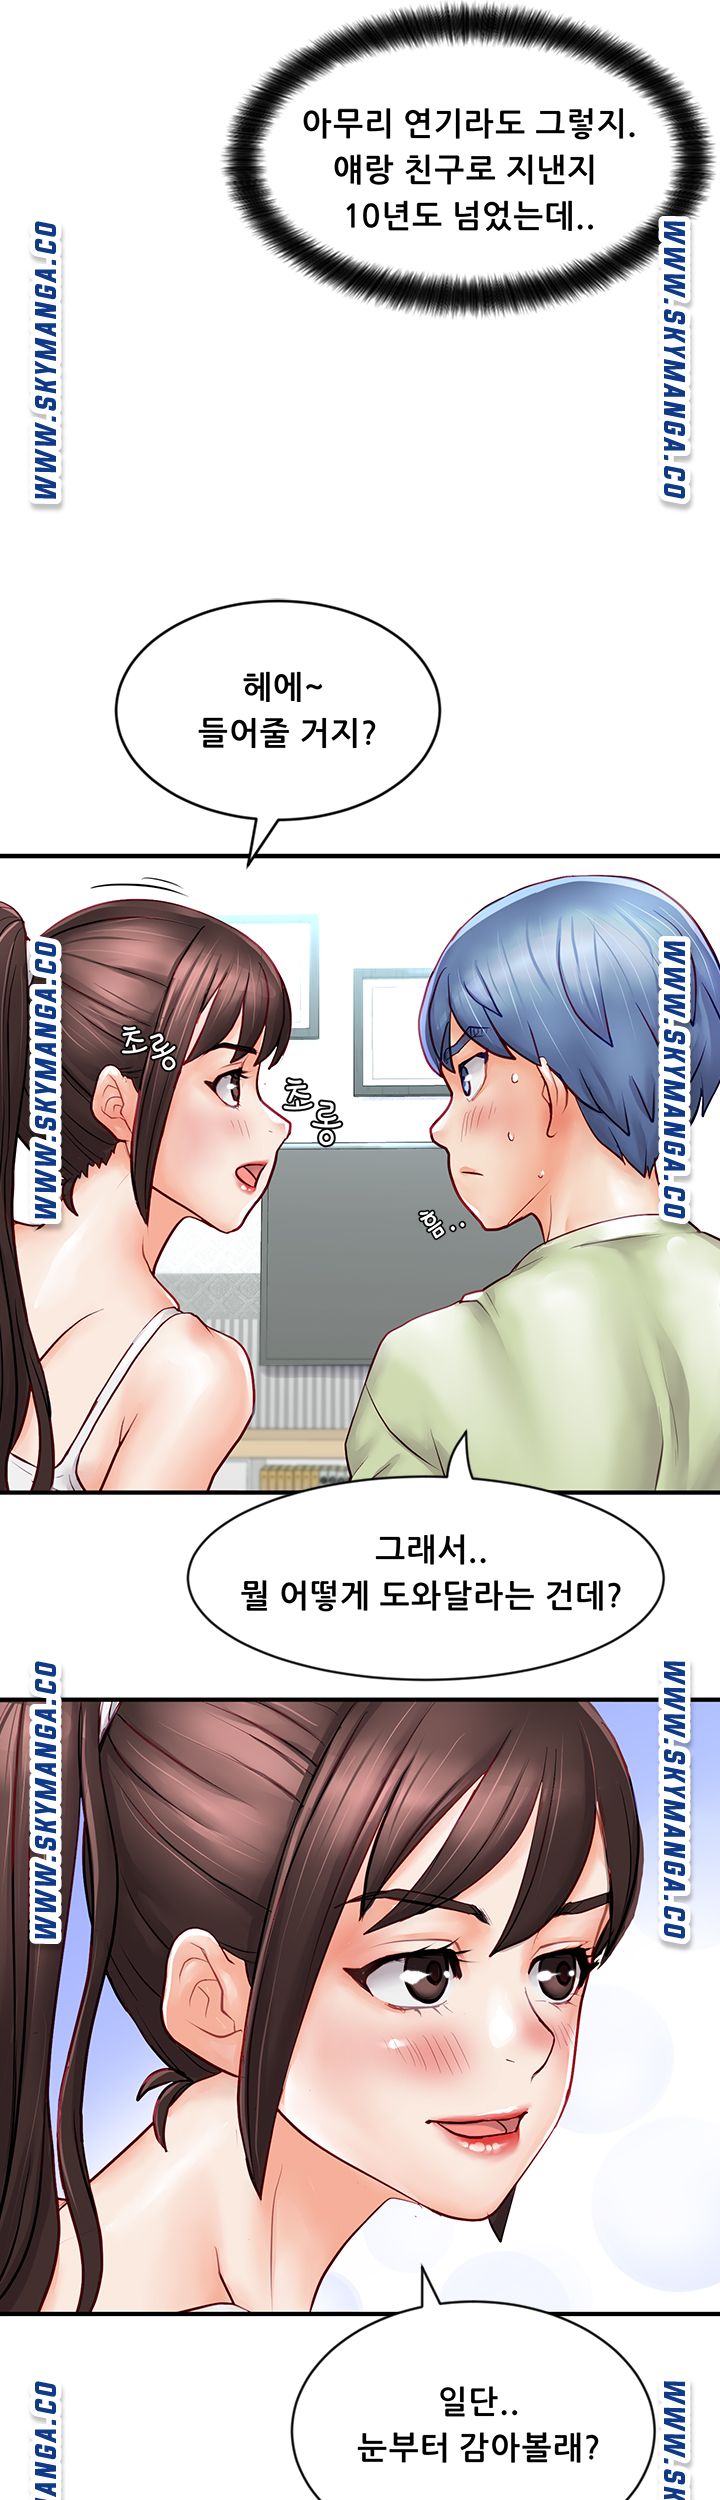 Broadcasting Club Raw - Chapter 3 Page 41